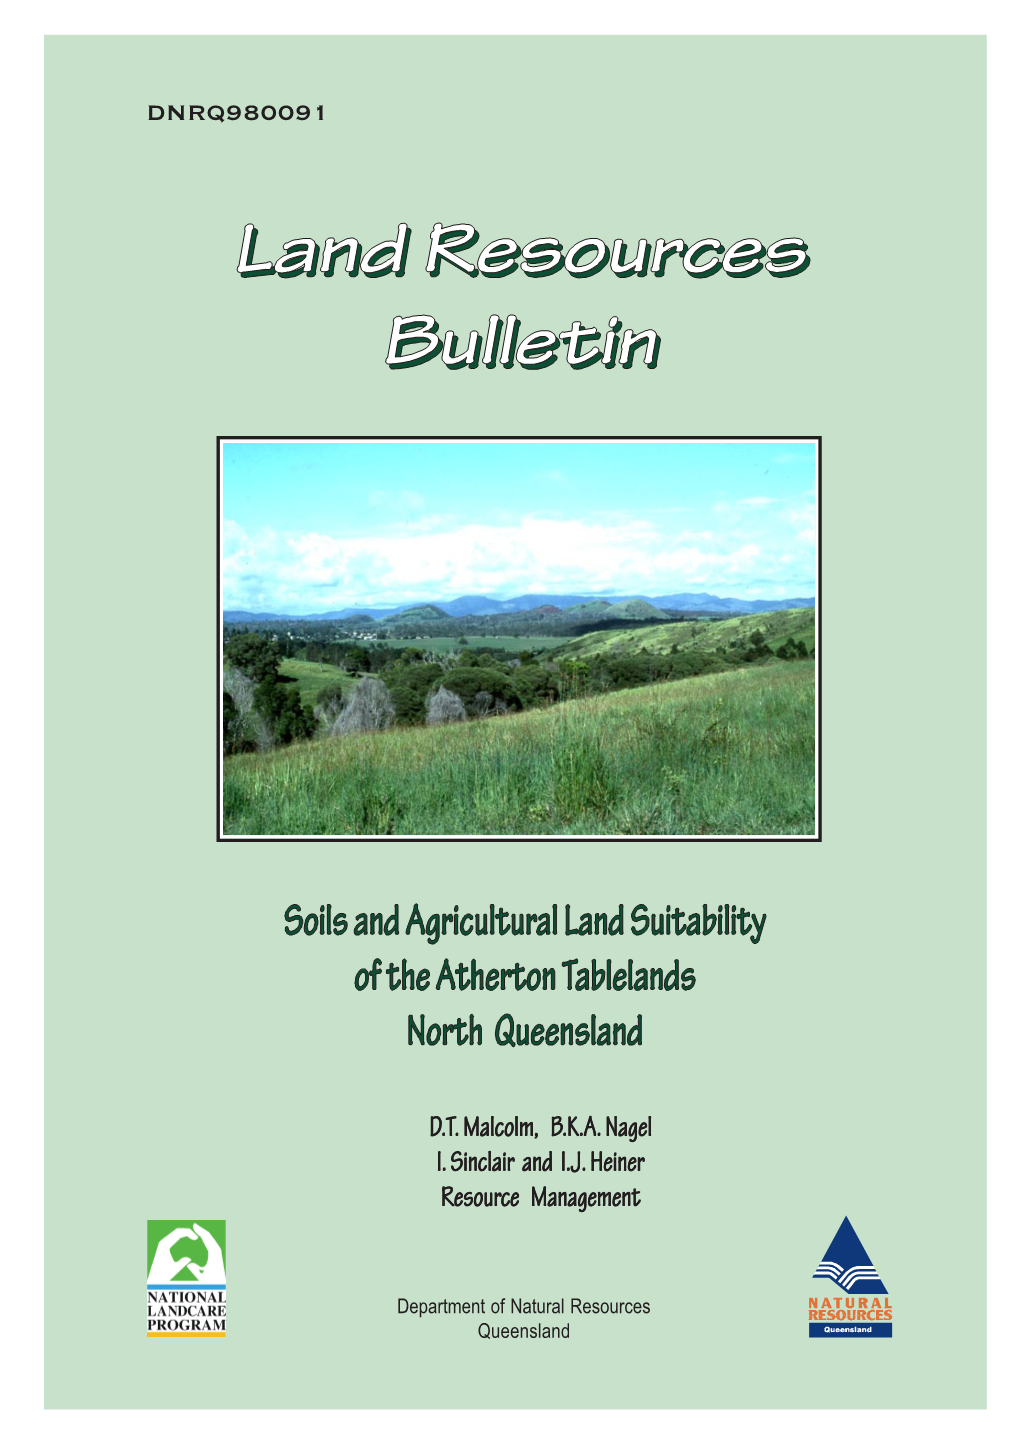 Soils and Agricultural Land Suitability of the Atherton Tablelands, North